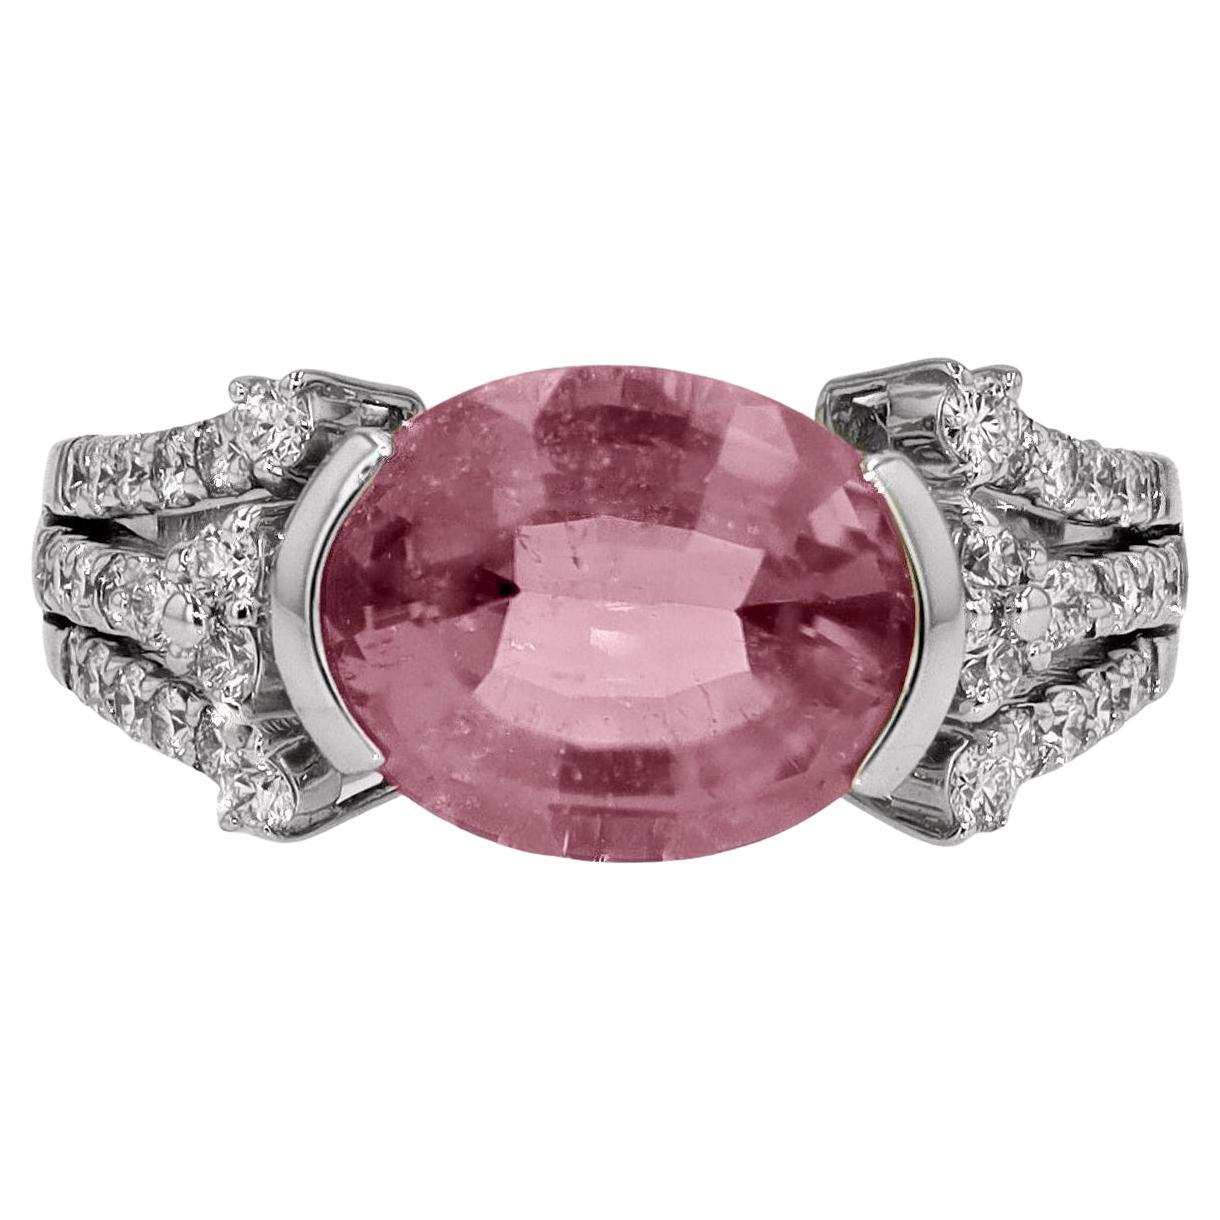 East West 6.90 Carat Pink Tourmaline and Diamond Ring